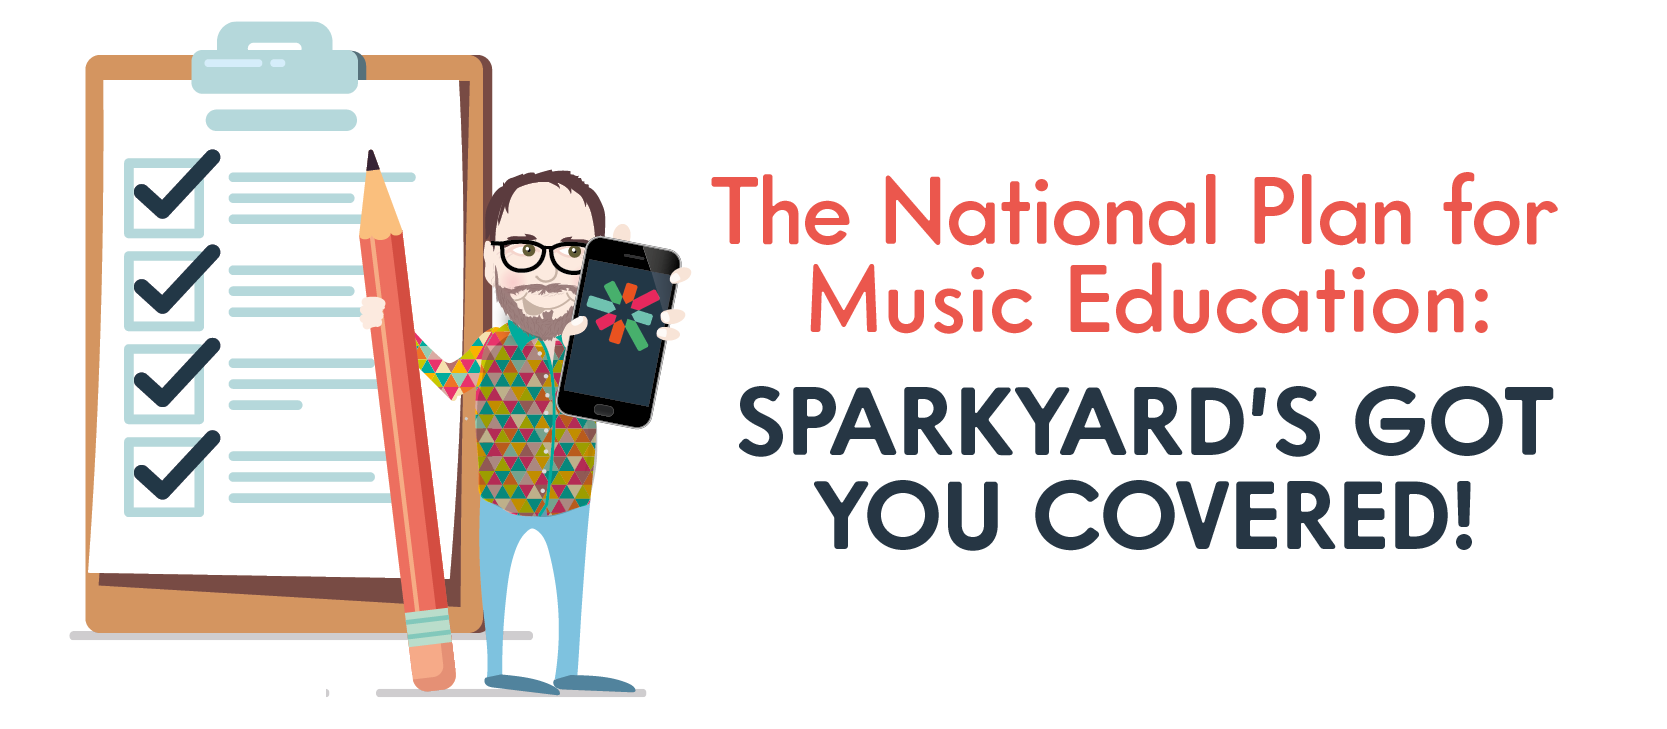 The National Plan For Music Education - Sparkyard's Got You Covered